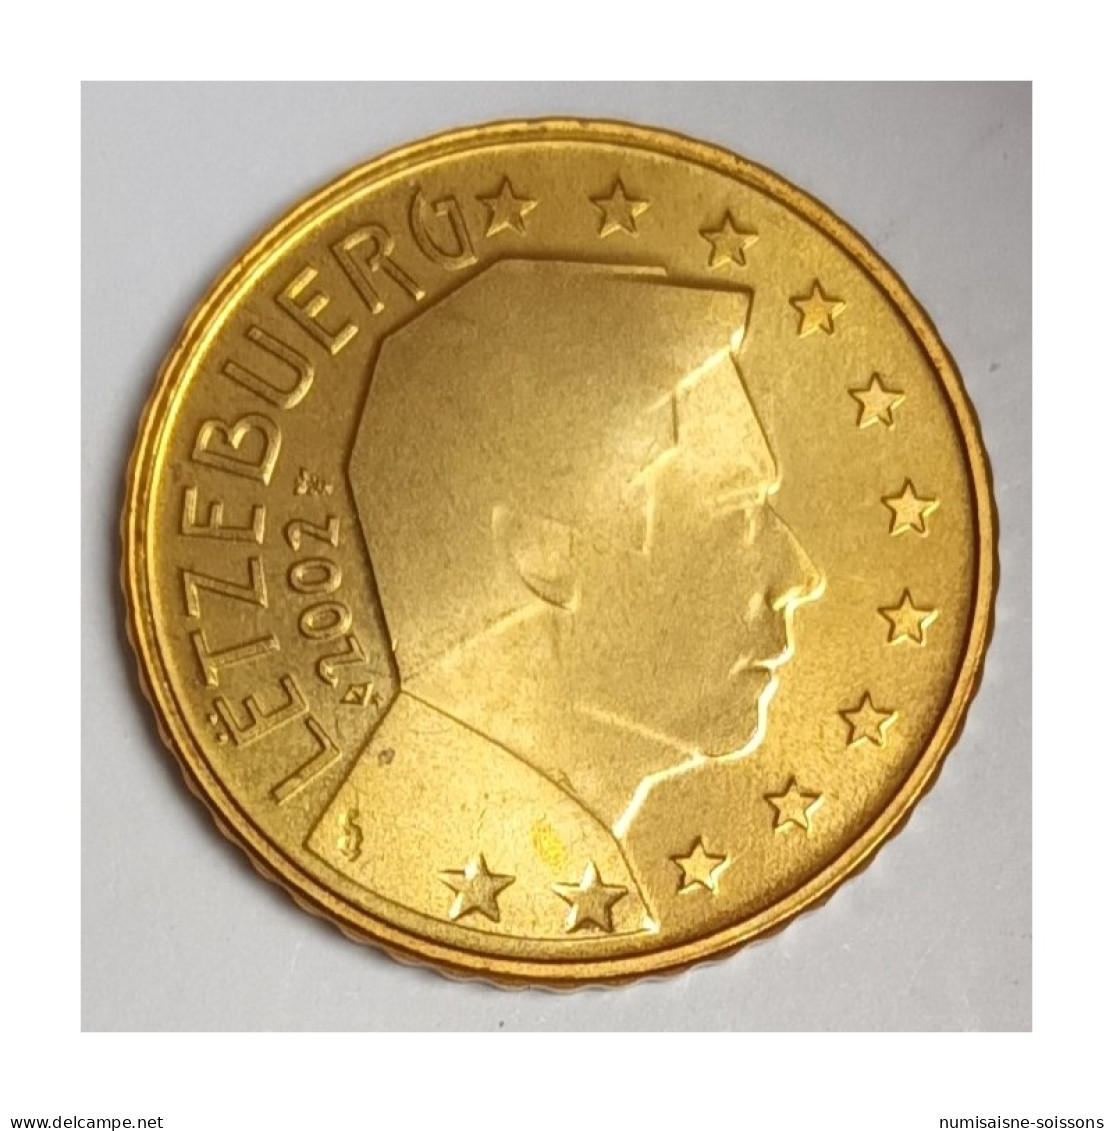 LUXEMBOURG - 50 CENT 2002 - GRAND DUC HENRI - SPL - Luxembourg